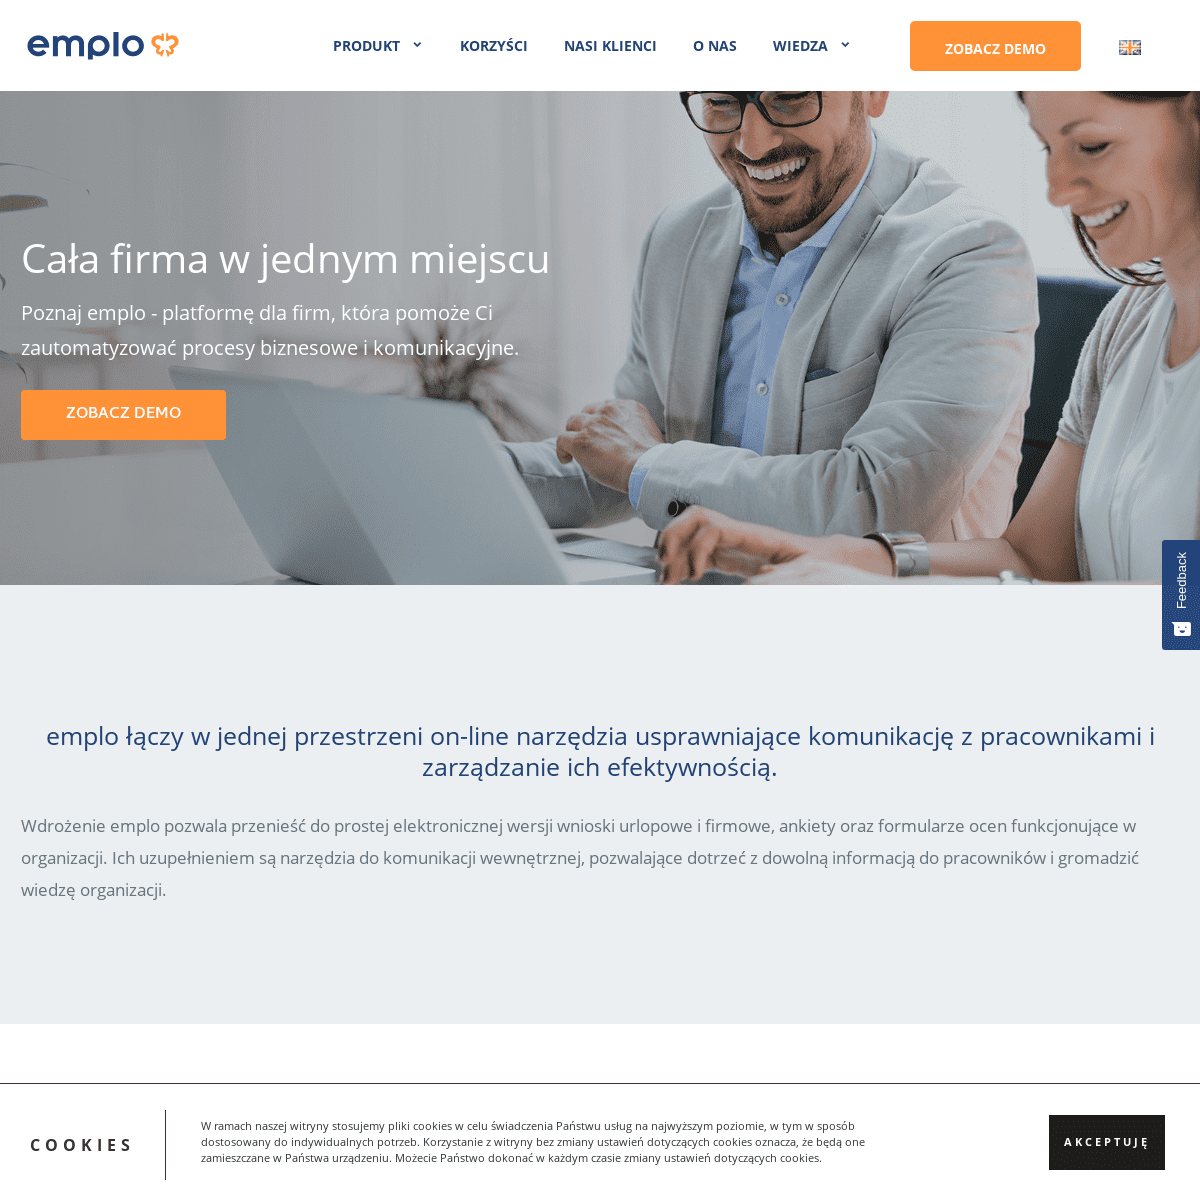 A complete backup of emplo.com